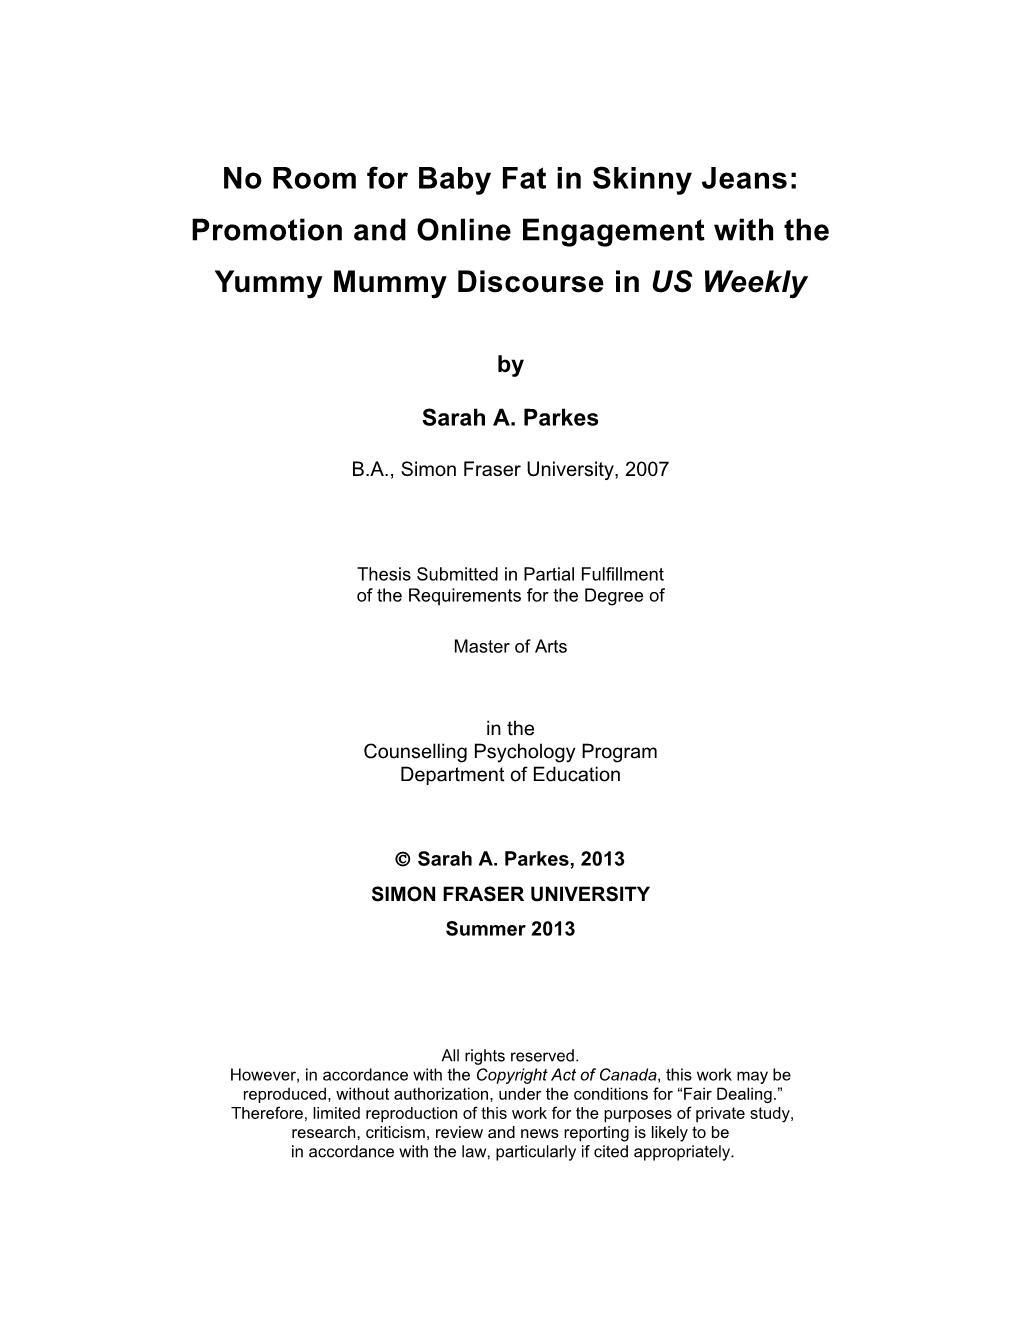 No Room for Baby Fat in Skinny Jeans: Promotion and Online Engagement with The